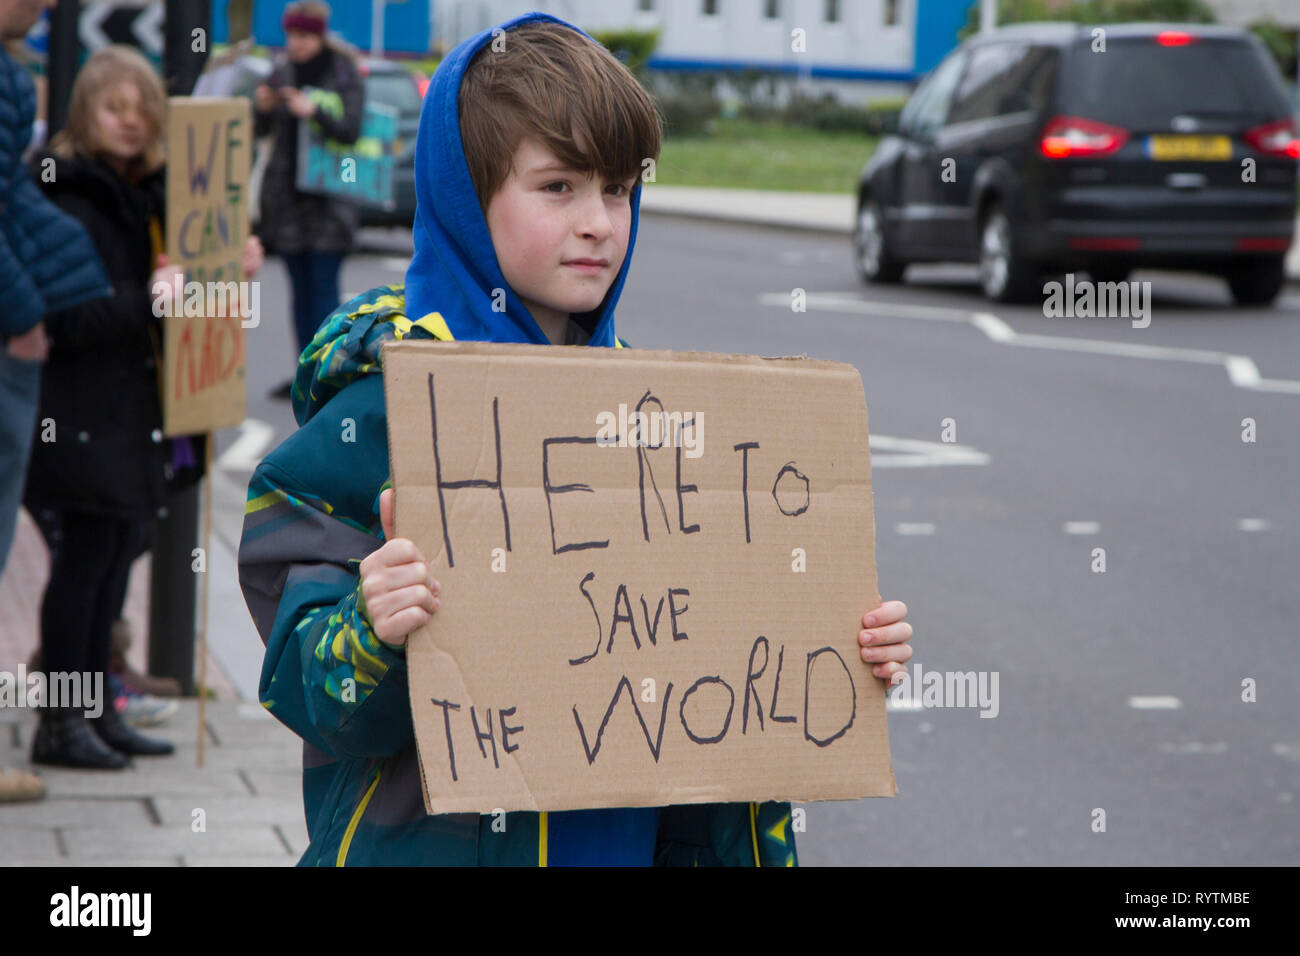 Reading, UK. 15th March 2019. School children take time off school as part of the International Youth Climate Strike campaign also known as Fridays For Future or School Strike 4 Climate. Credit: Harry Harrison/Alamy Live News Stock Photo